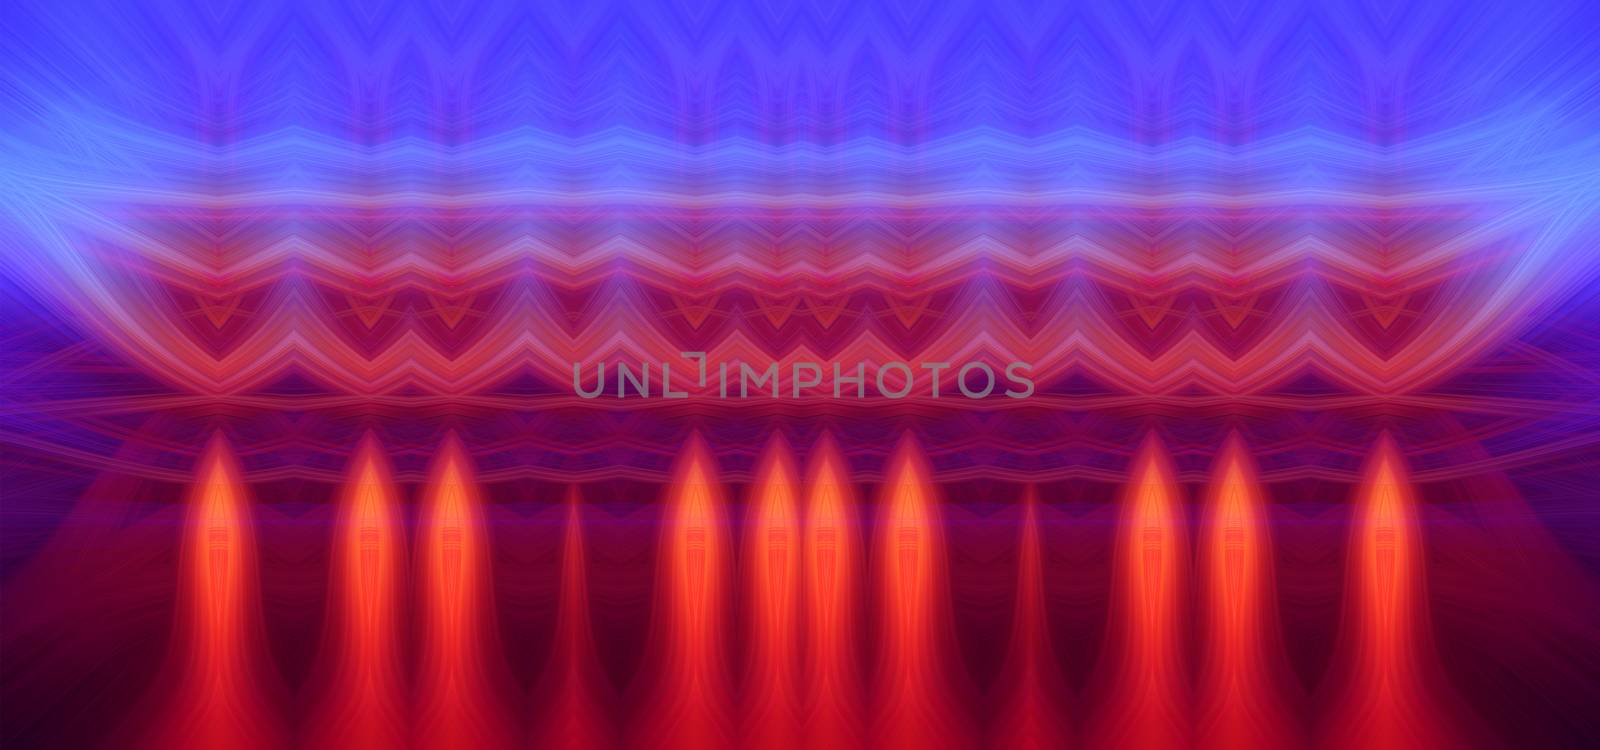 Beautiful abstract intertwined symmetrical 3d fibers forming a shape of sparkle, flame, flower, rods. Pink, blue, maroon, orange, and purple colors. Illustration. Banner and panorama size